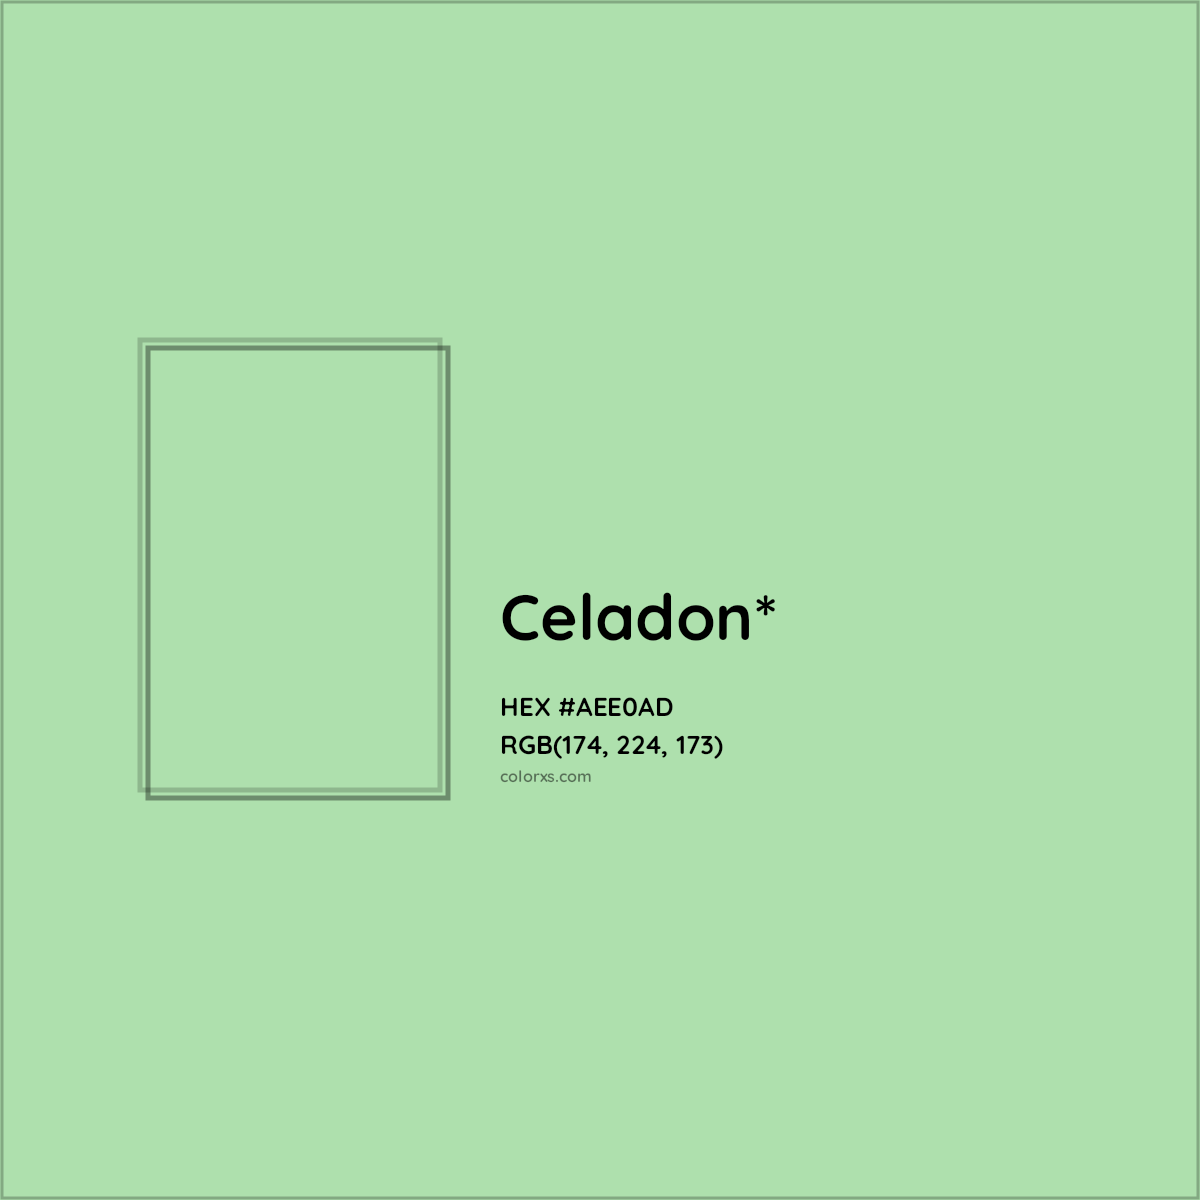 HEX #AEE0AD Color Name, Color Code, Palettes, Similar Paints, Images